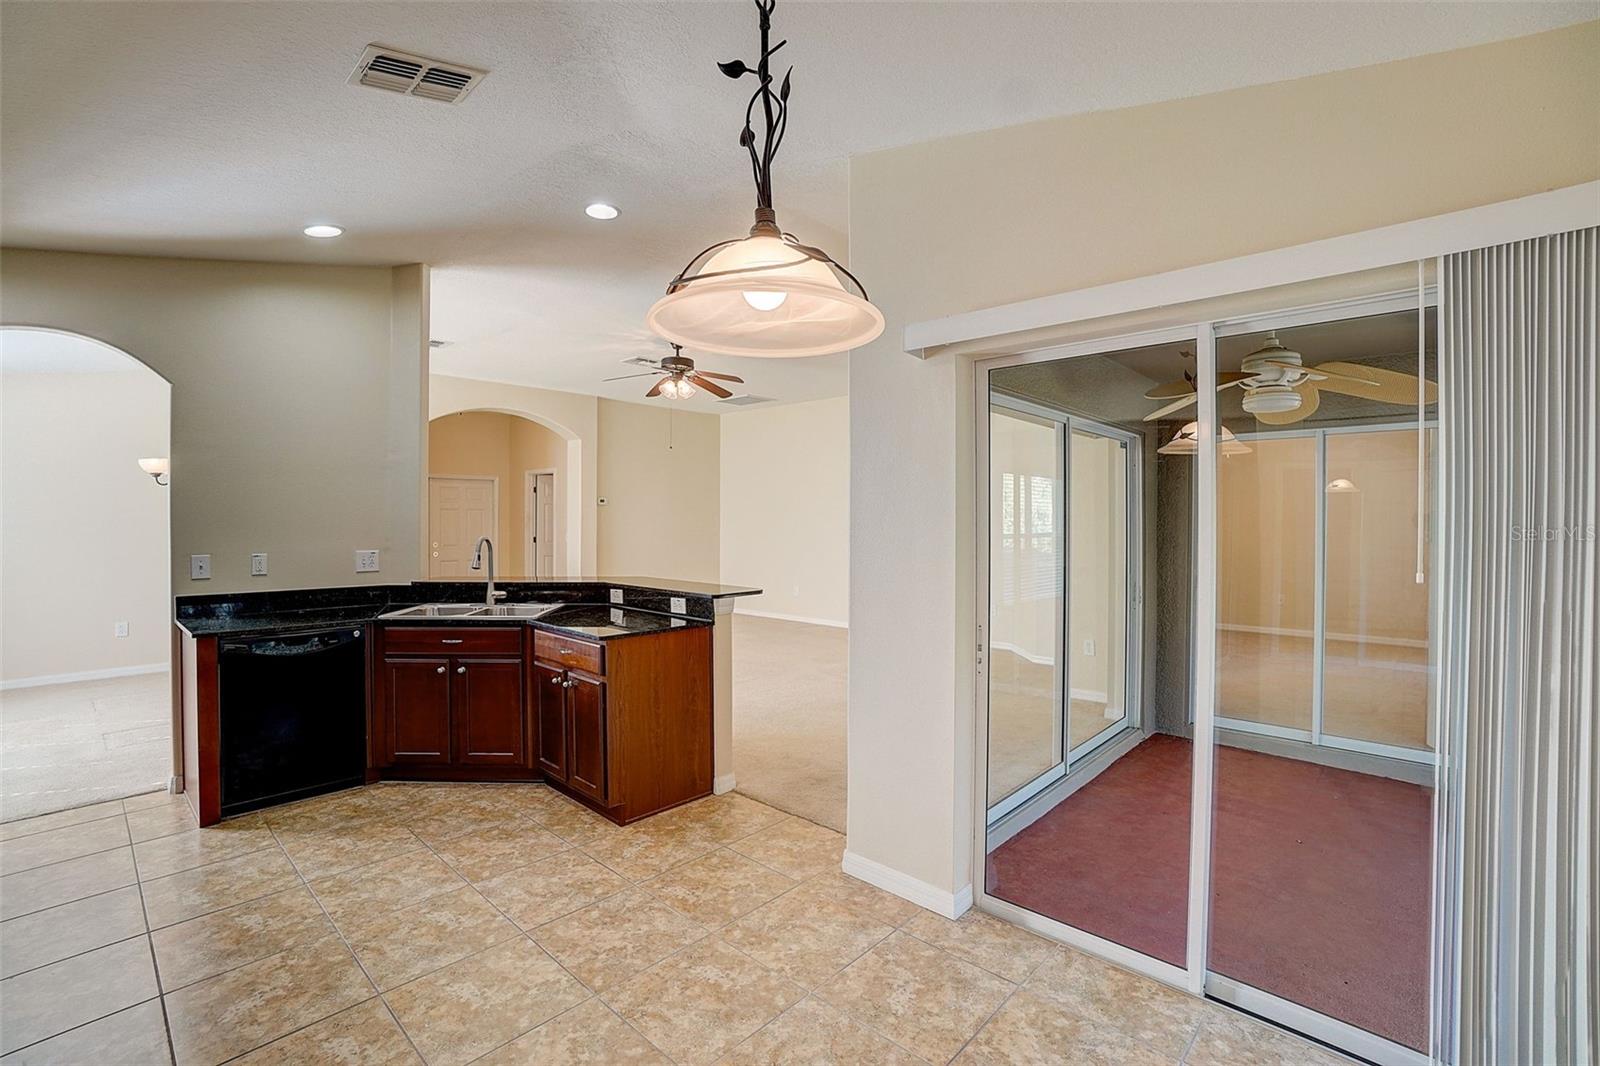 Kitchen leads right to covered lanai through sliders.